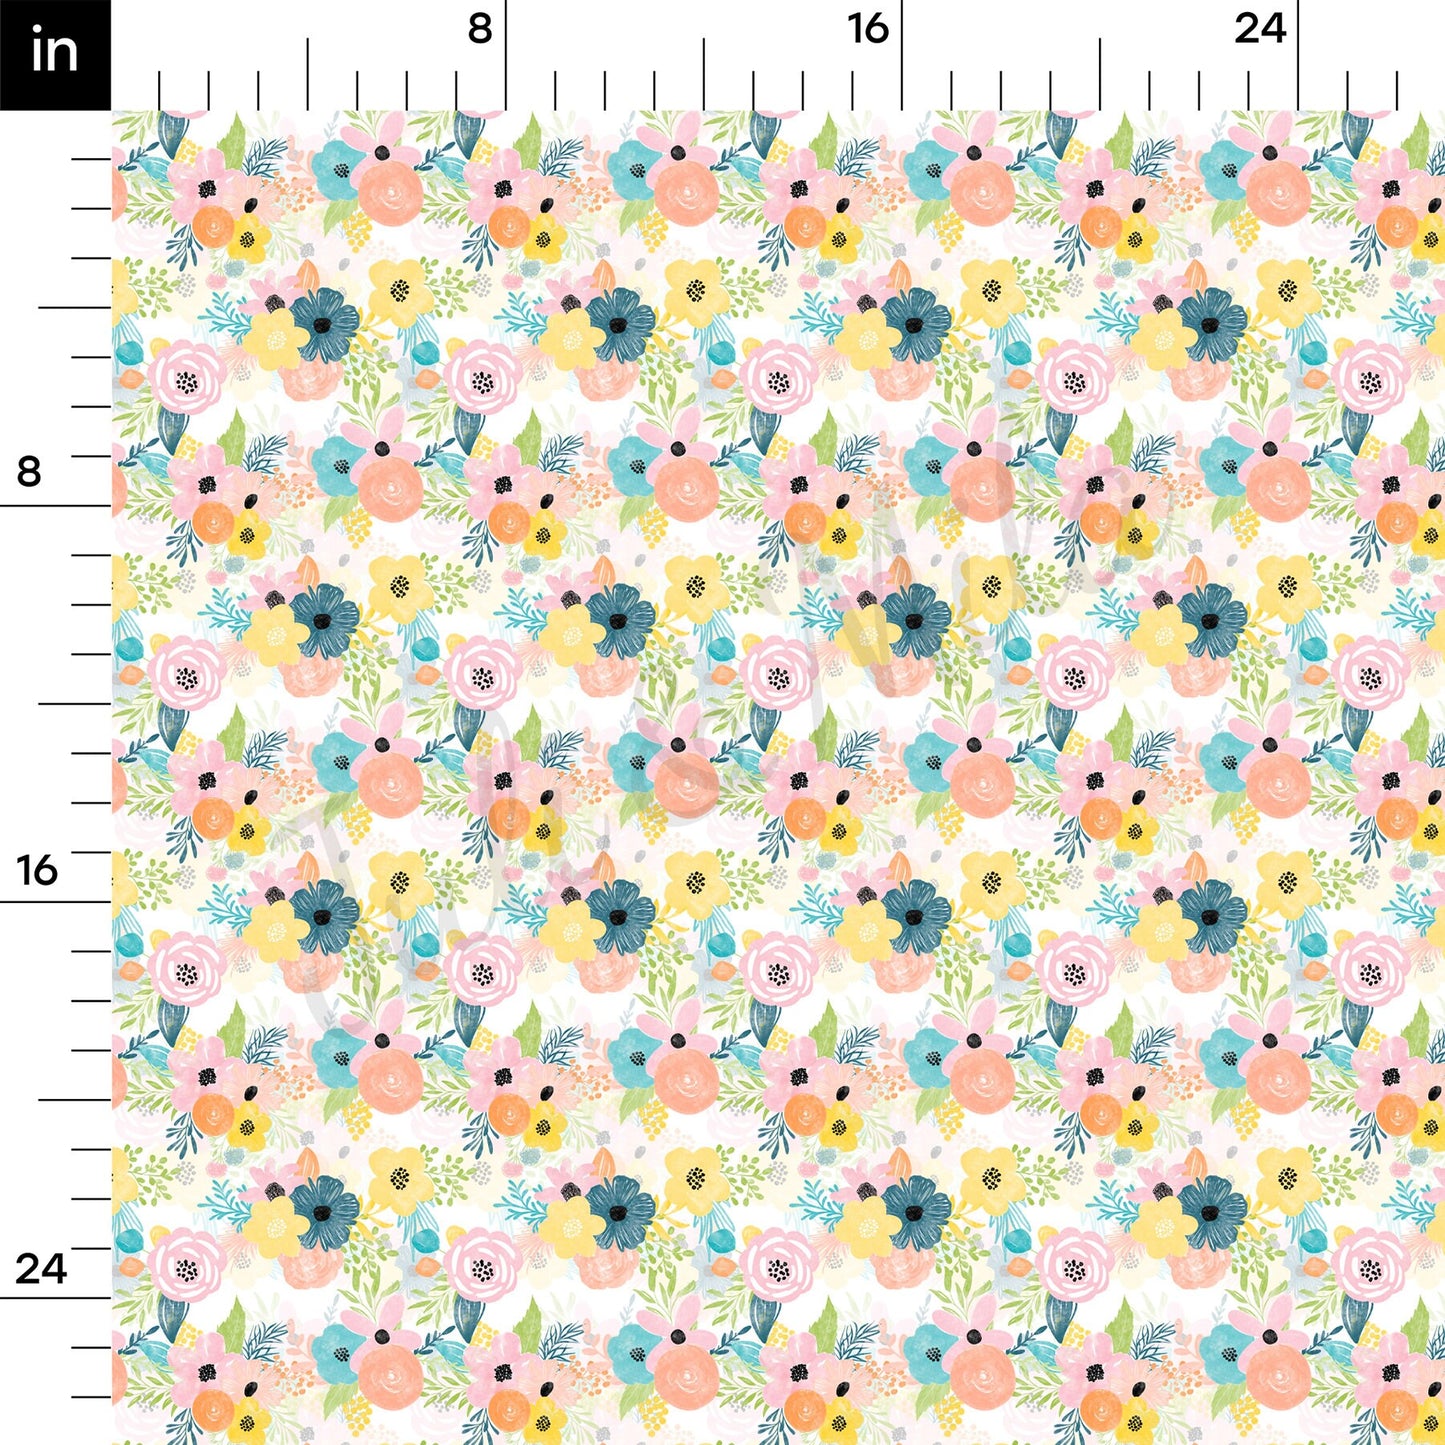 Floral Bullet Textured Fabric by the yard 4Way AA1471